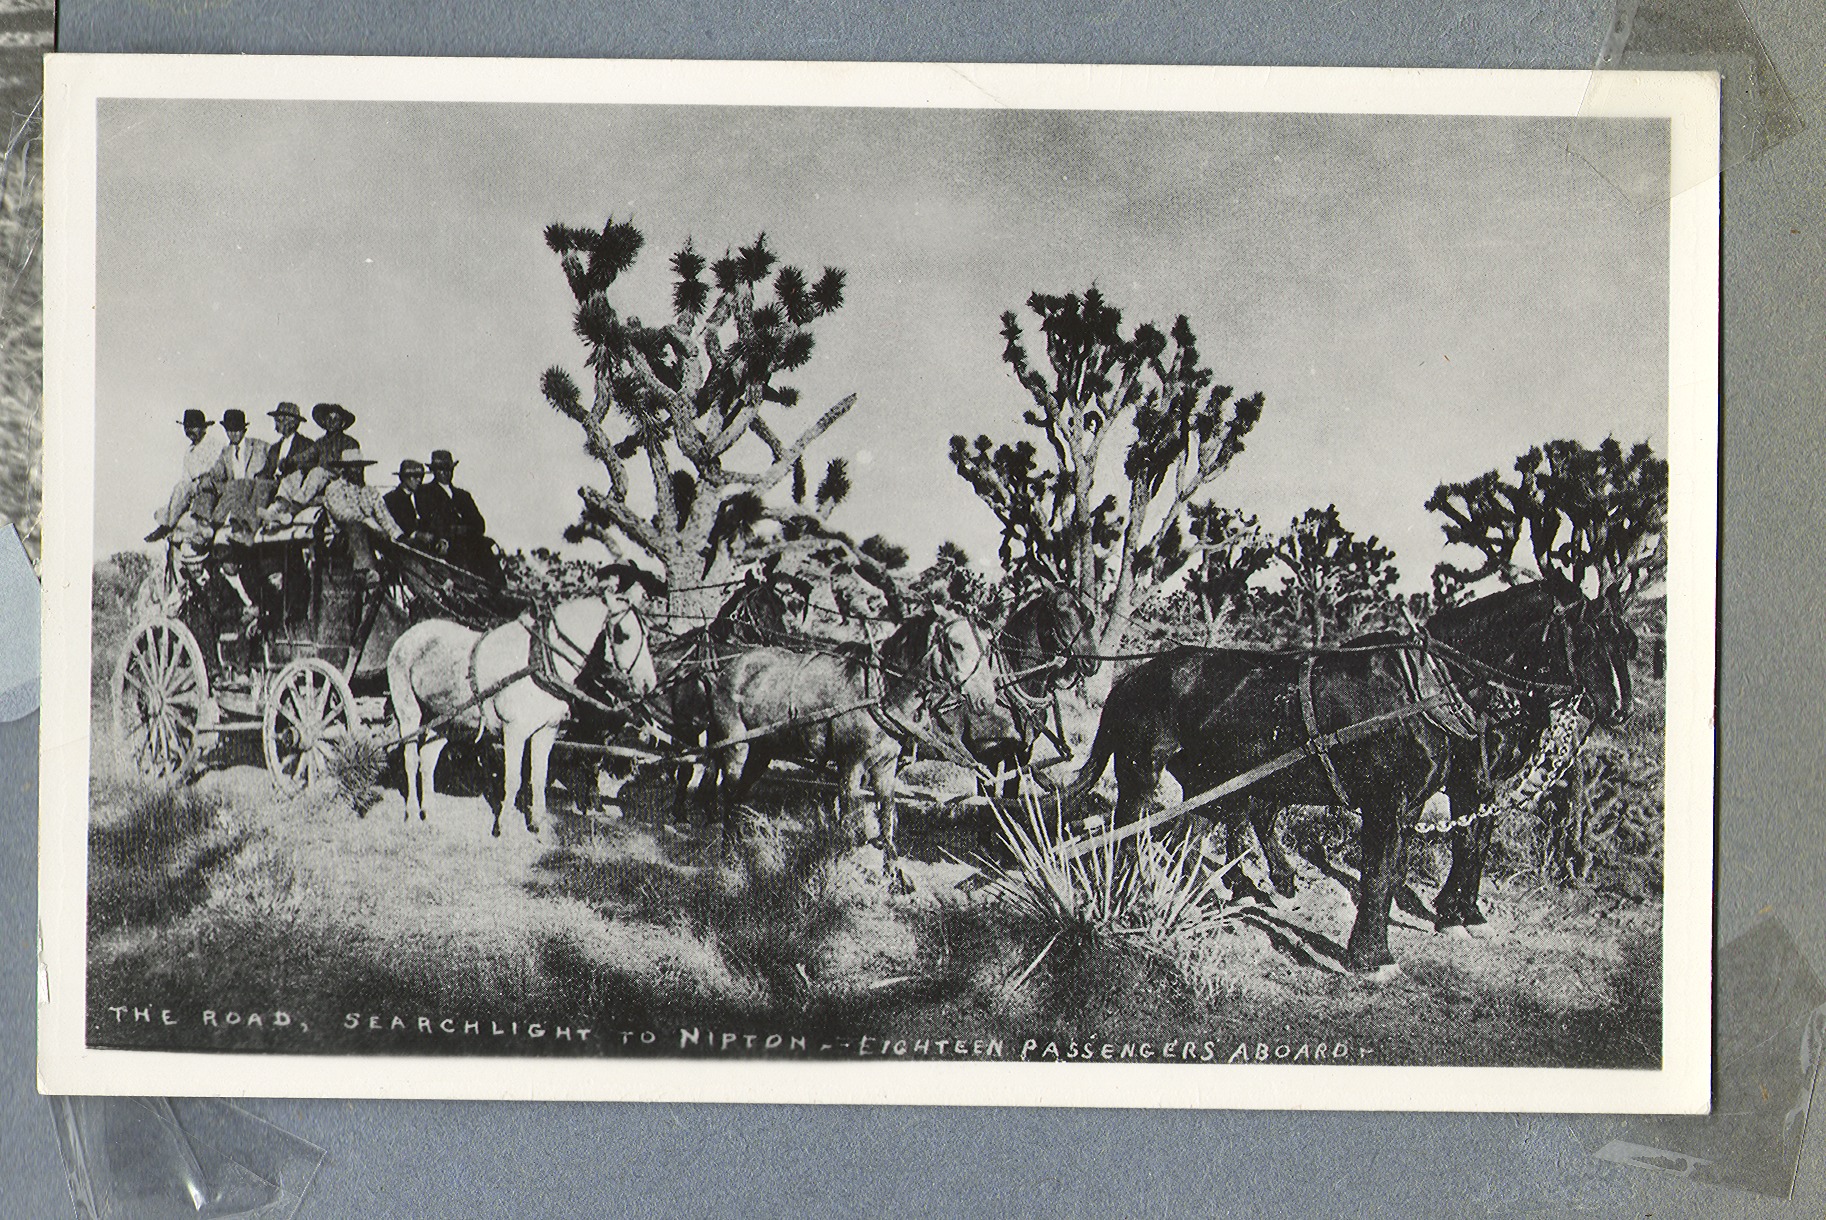 The road, Searchlight to Nipton, fourteen passengers aboard a horse-drawn cart. (postcard?)